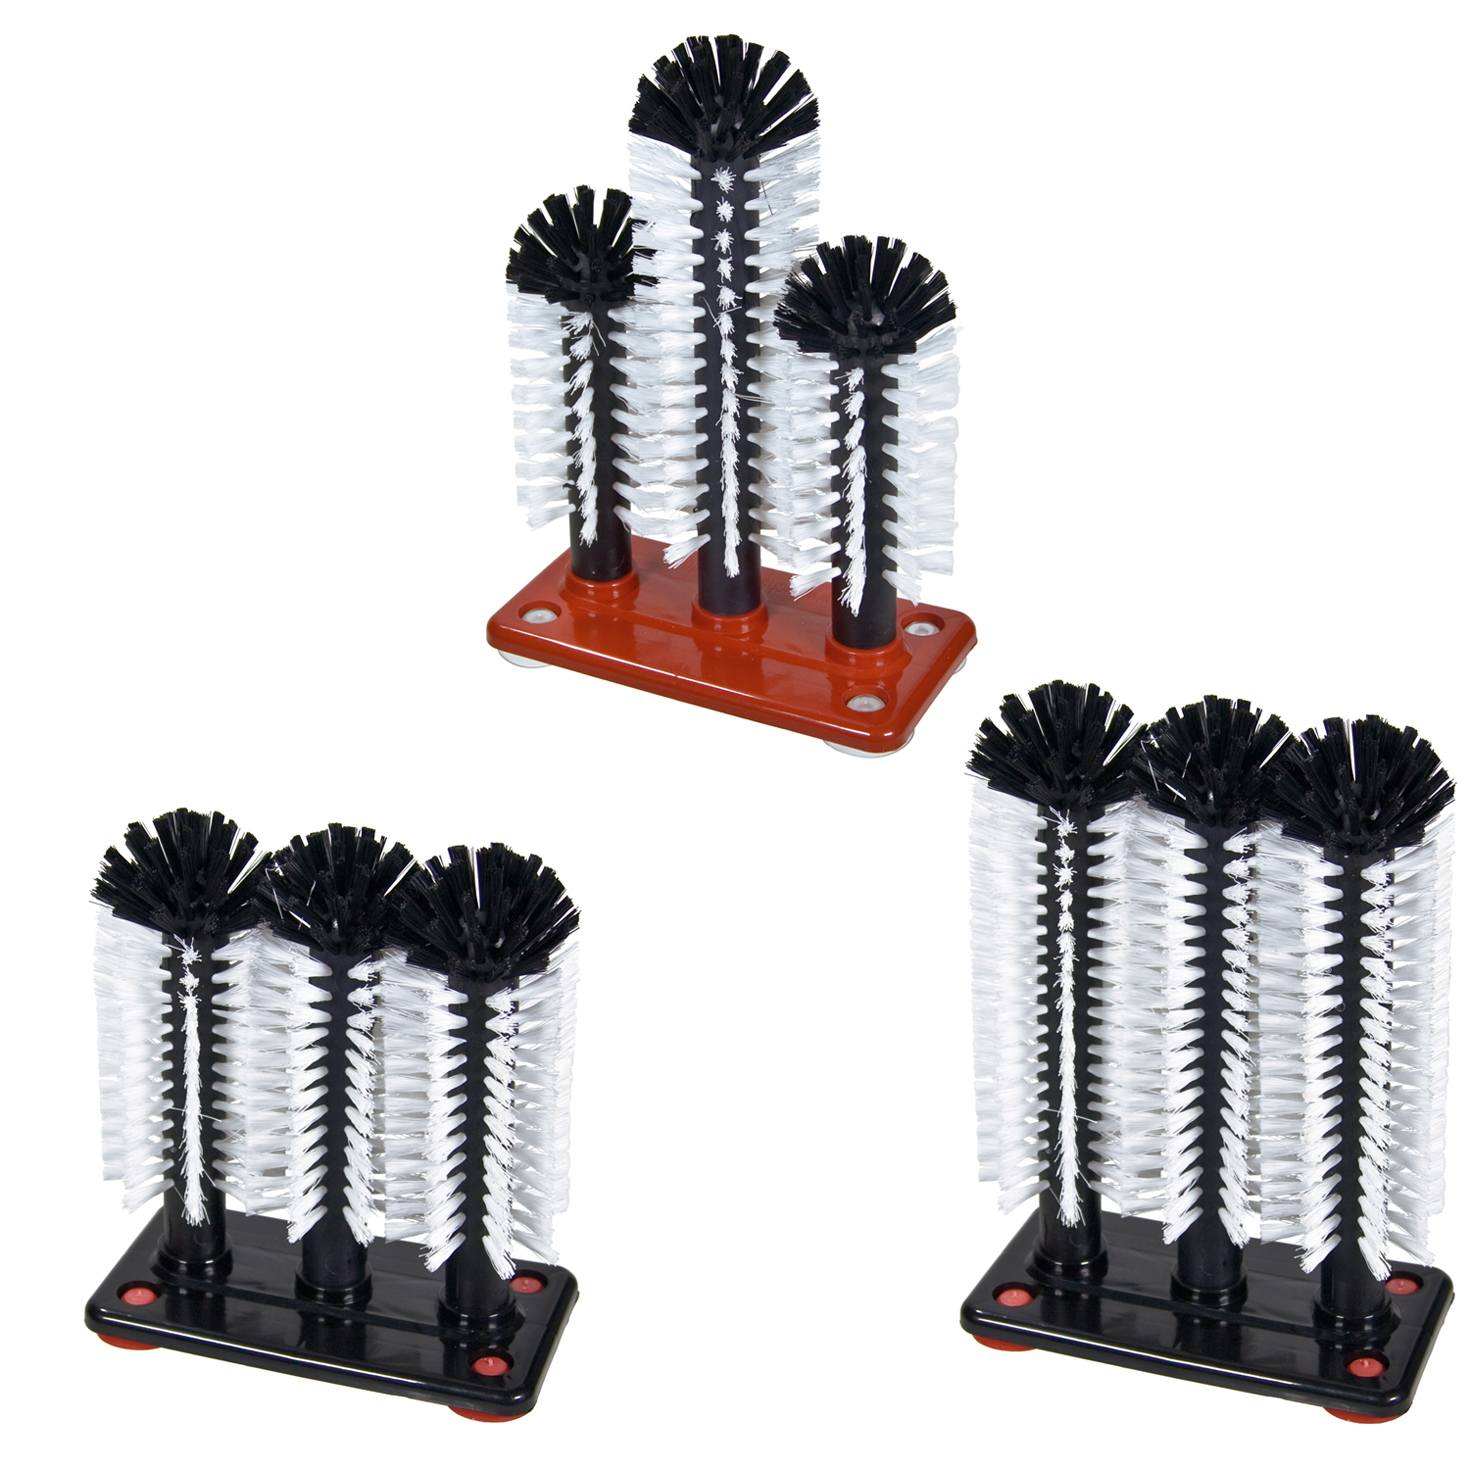 Glass cleaning brush - 1-, 2-, 3-piece